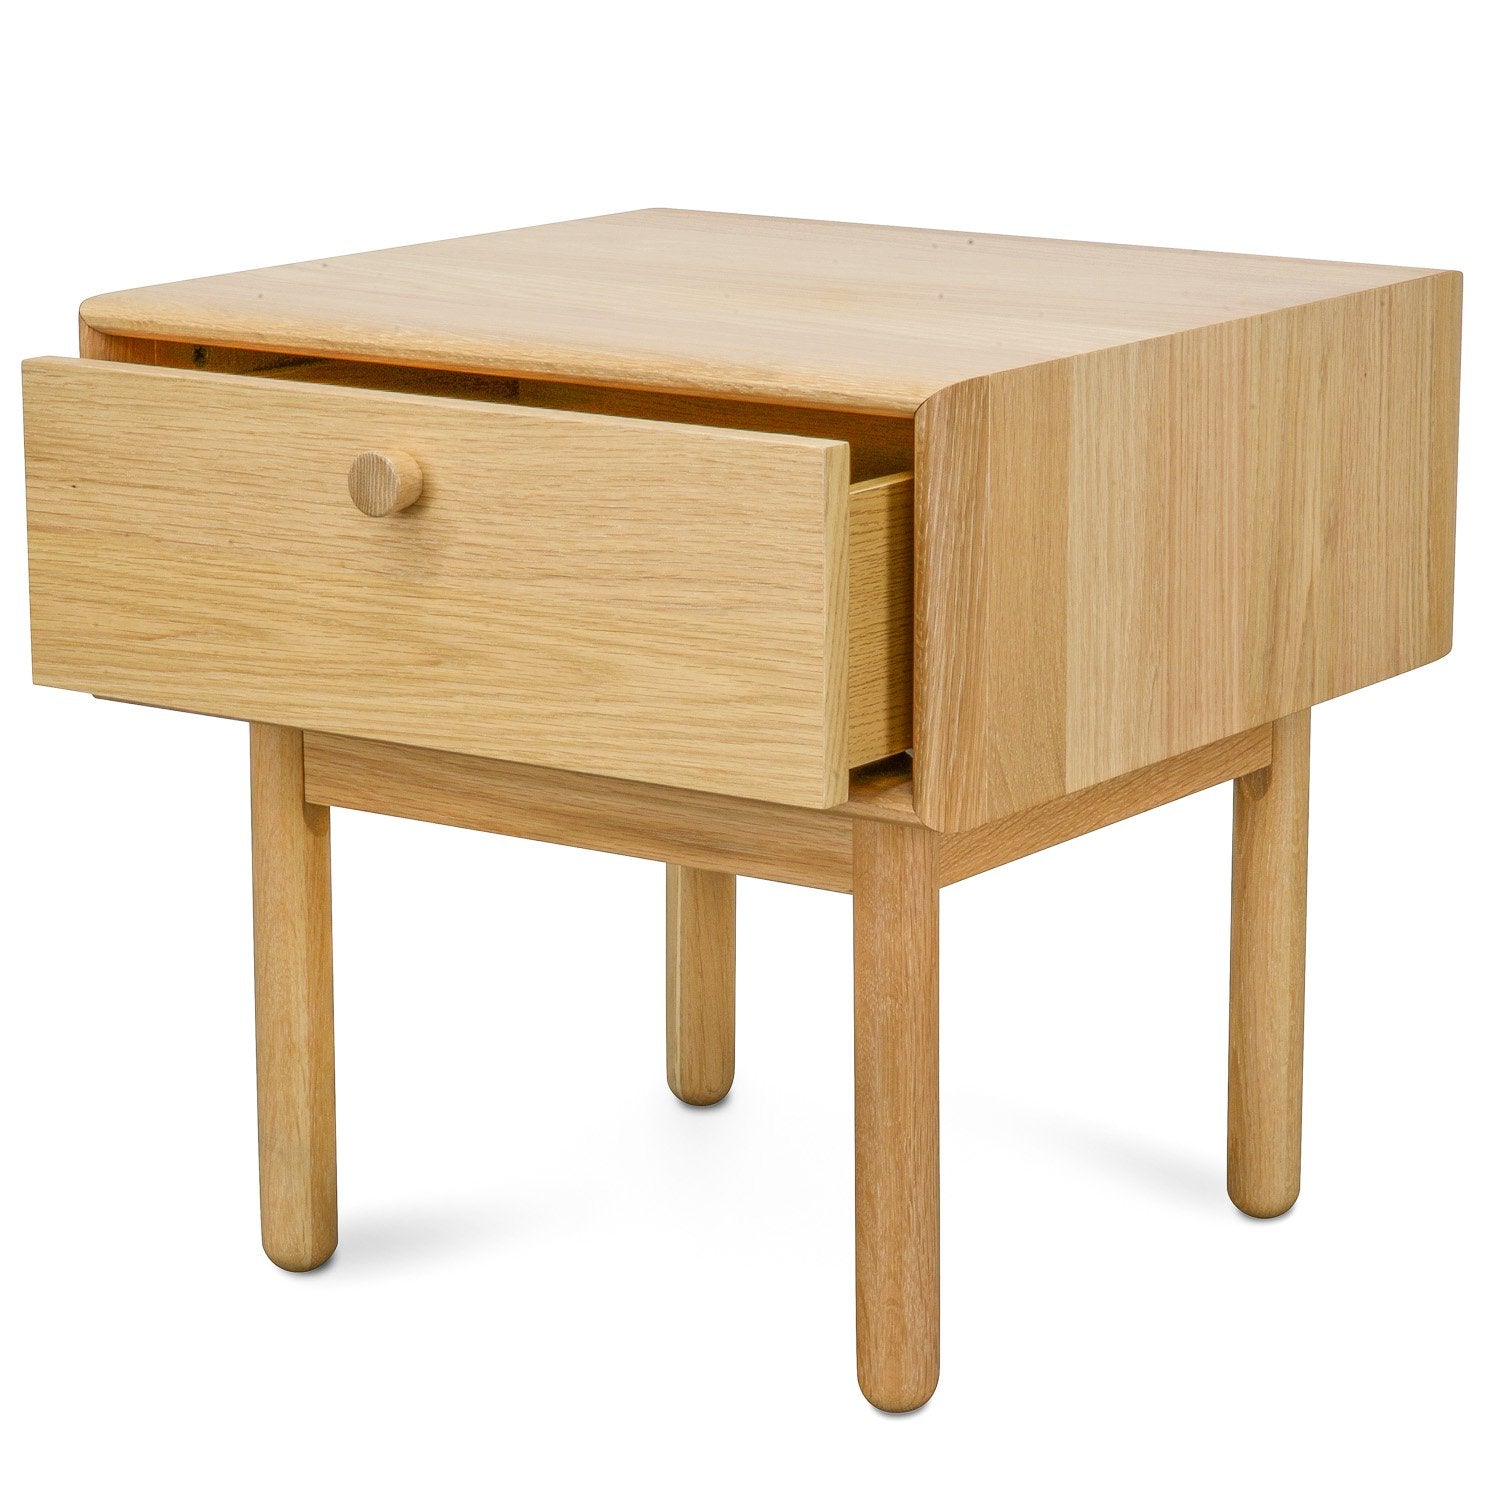 Brynn Wooden Lamp Side Table with Drawer - Natural - Bedside Tables